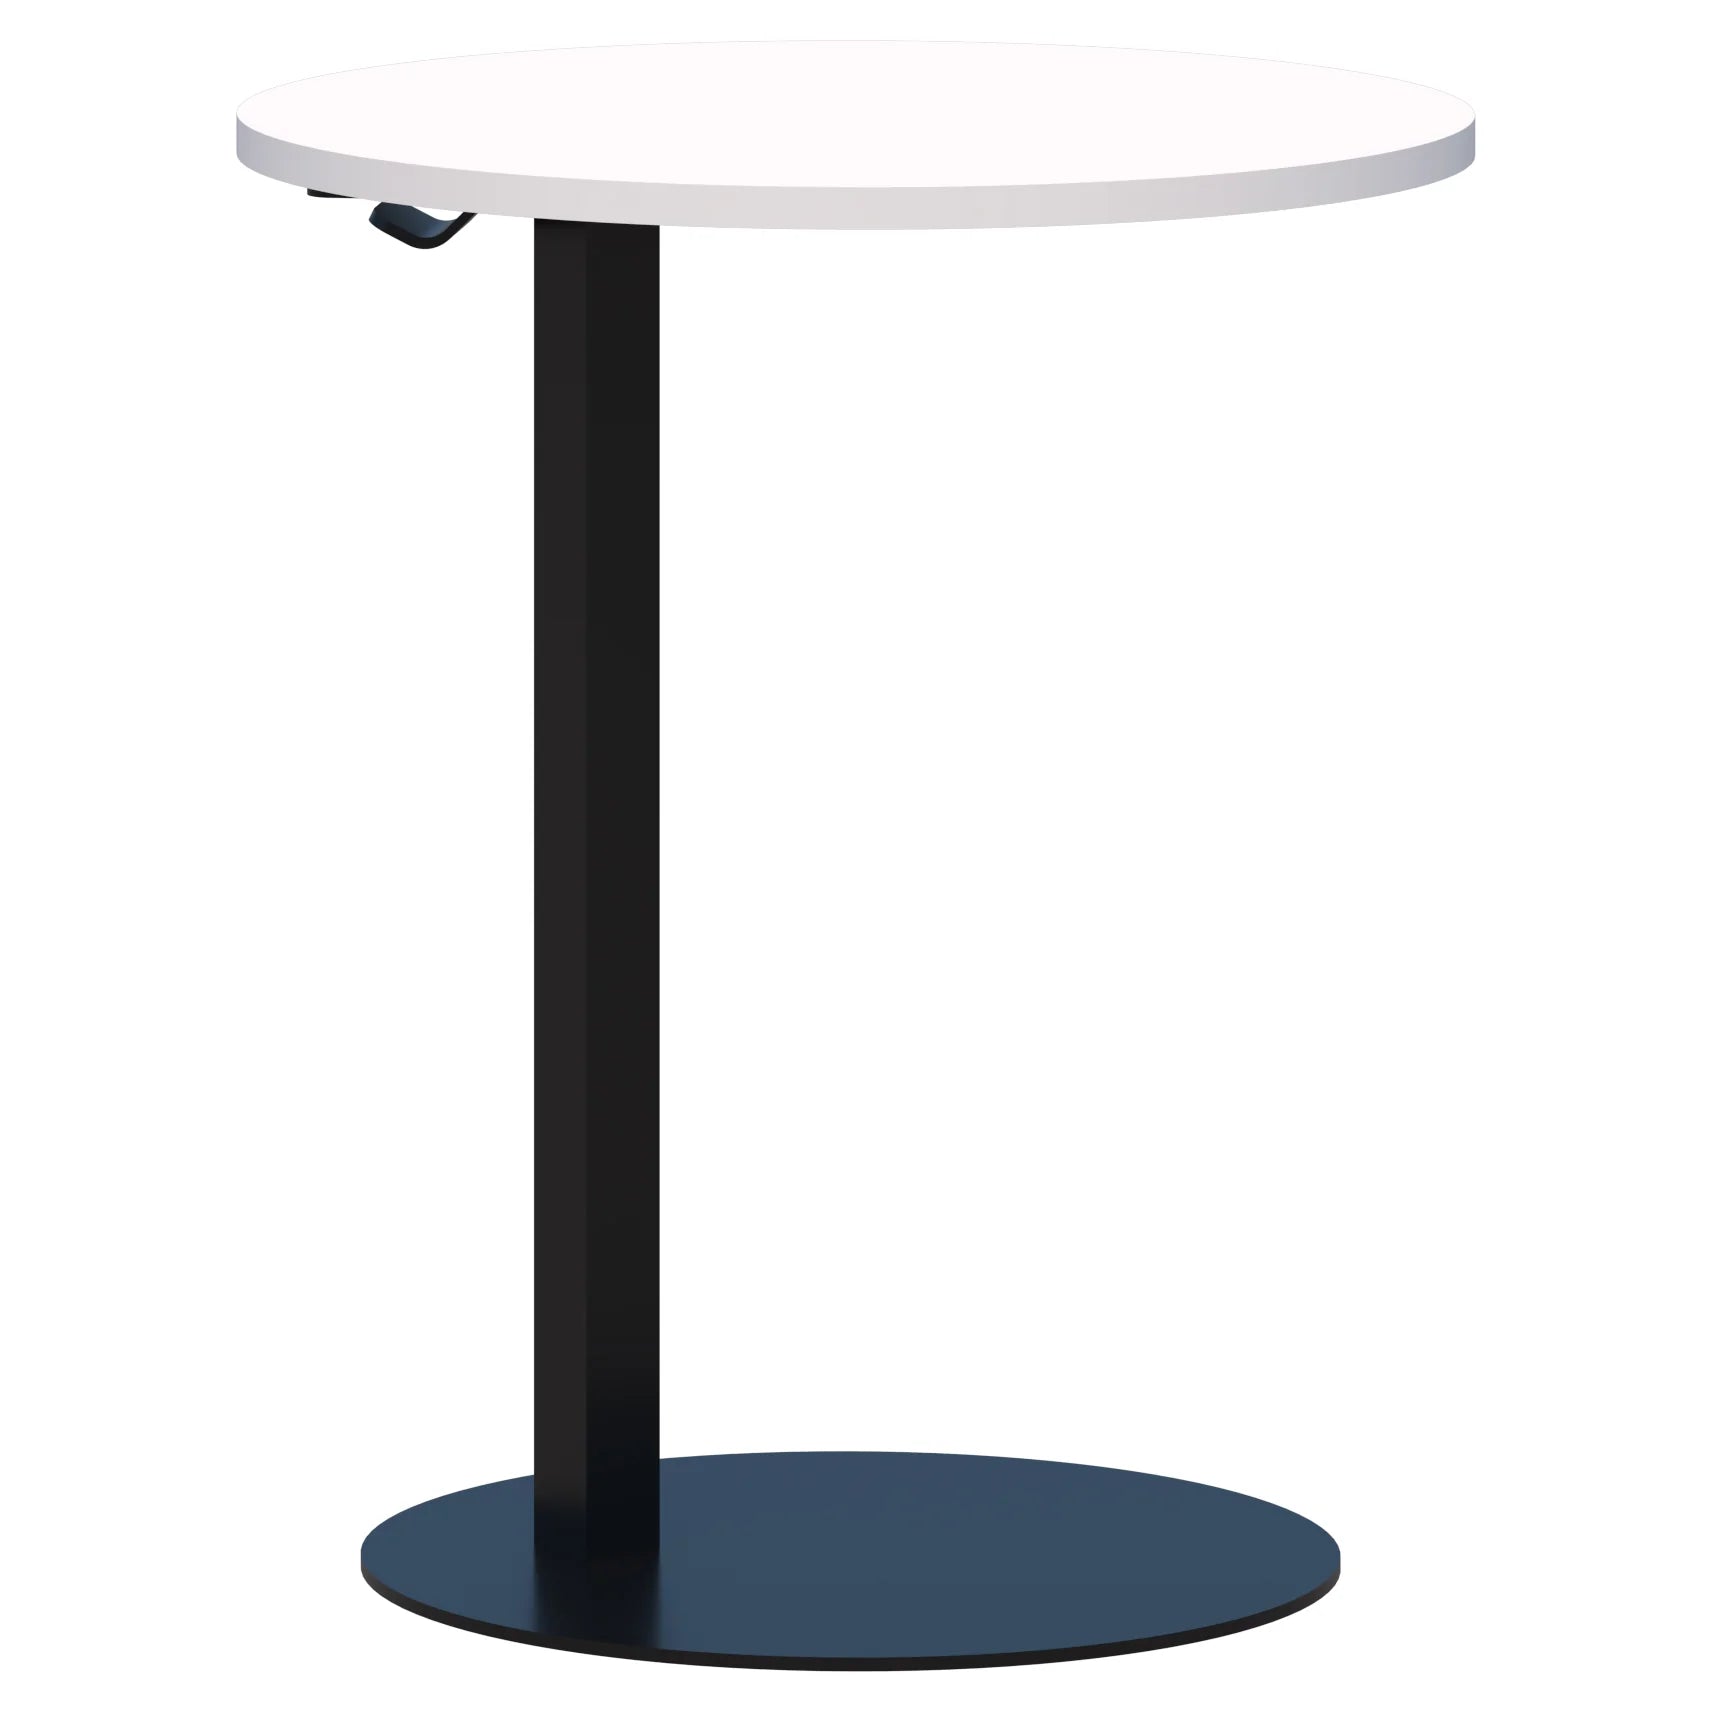 Memo laptop table with round top in snow velvet white and black pedestal base.